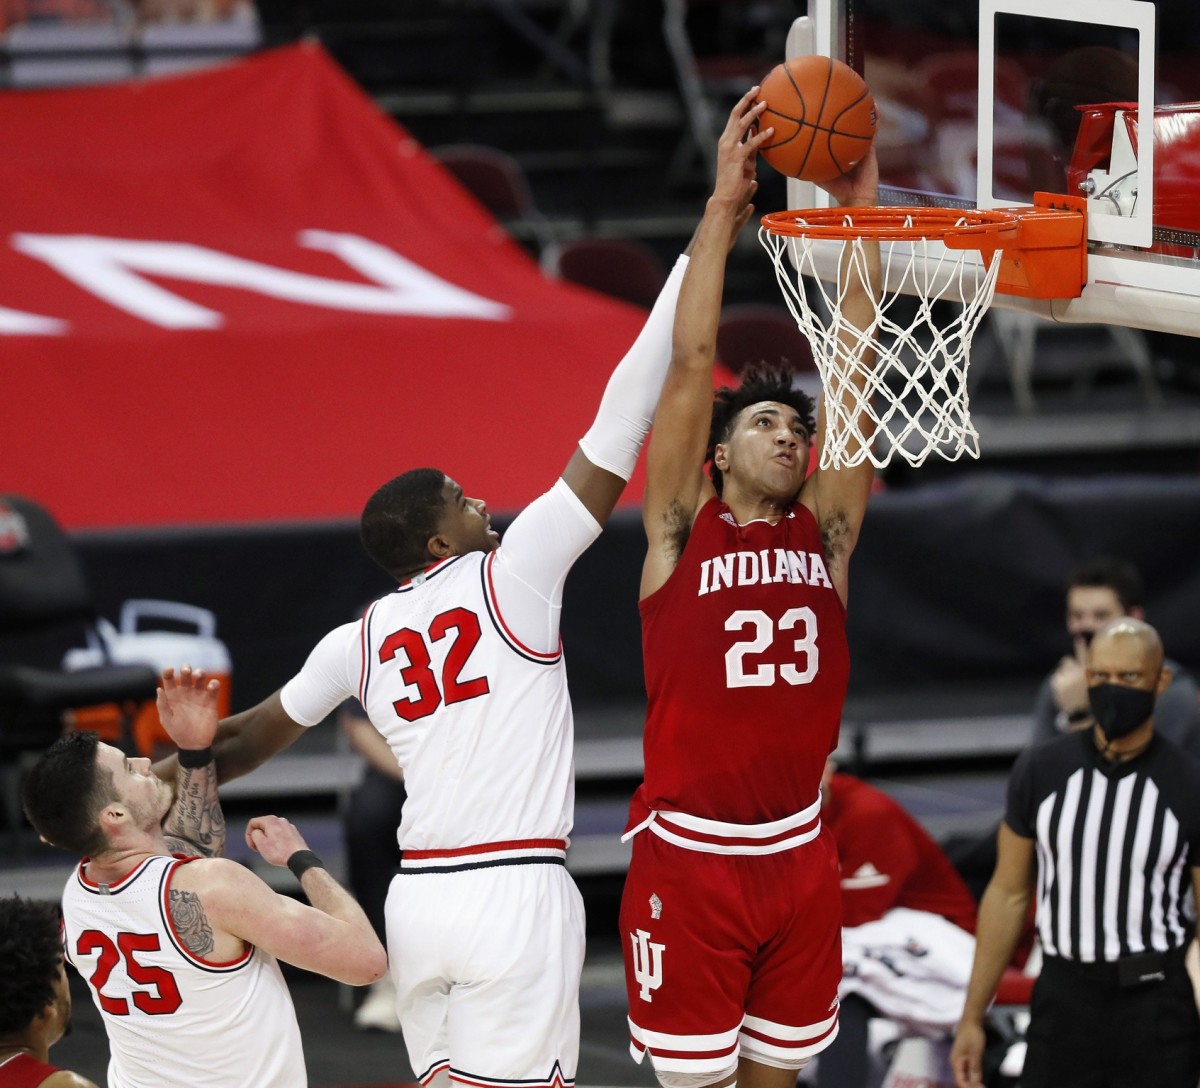 Trayce Jackson-Davis scored 22 points and had 9 rebounds for Indiana, but the Hoosiers were blistered 78-59 by No. 4 Ohio State. (USA TODAY Sports)